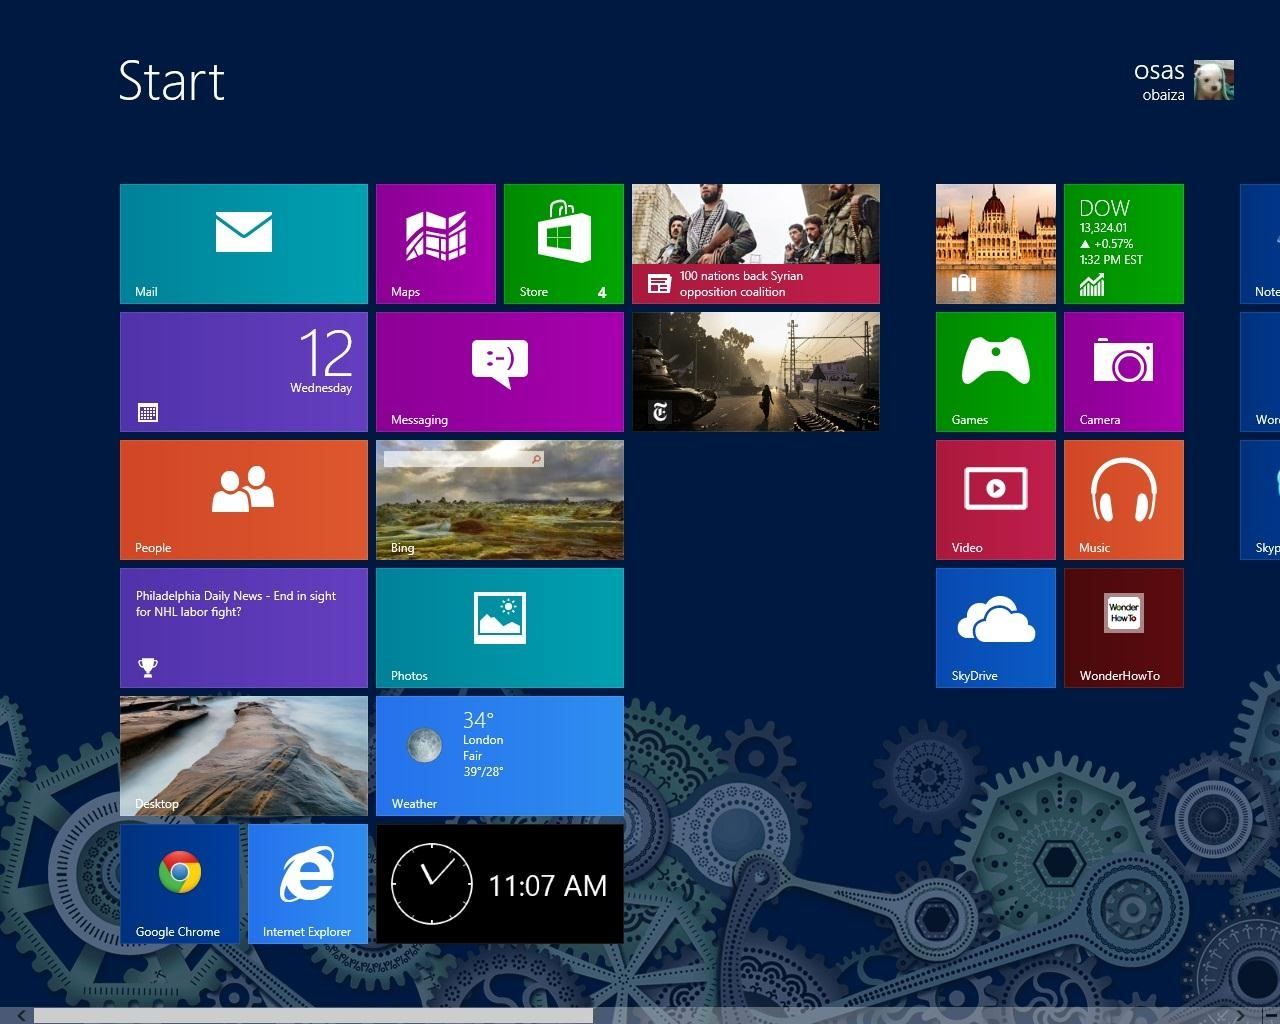 How to Get the Windows 8 Desktop and Start Screen (Or Taskbar and Start Screen) on the Same Display